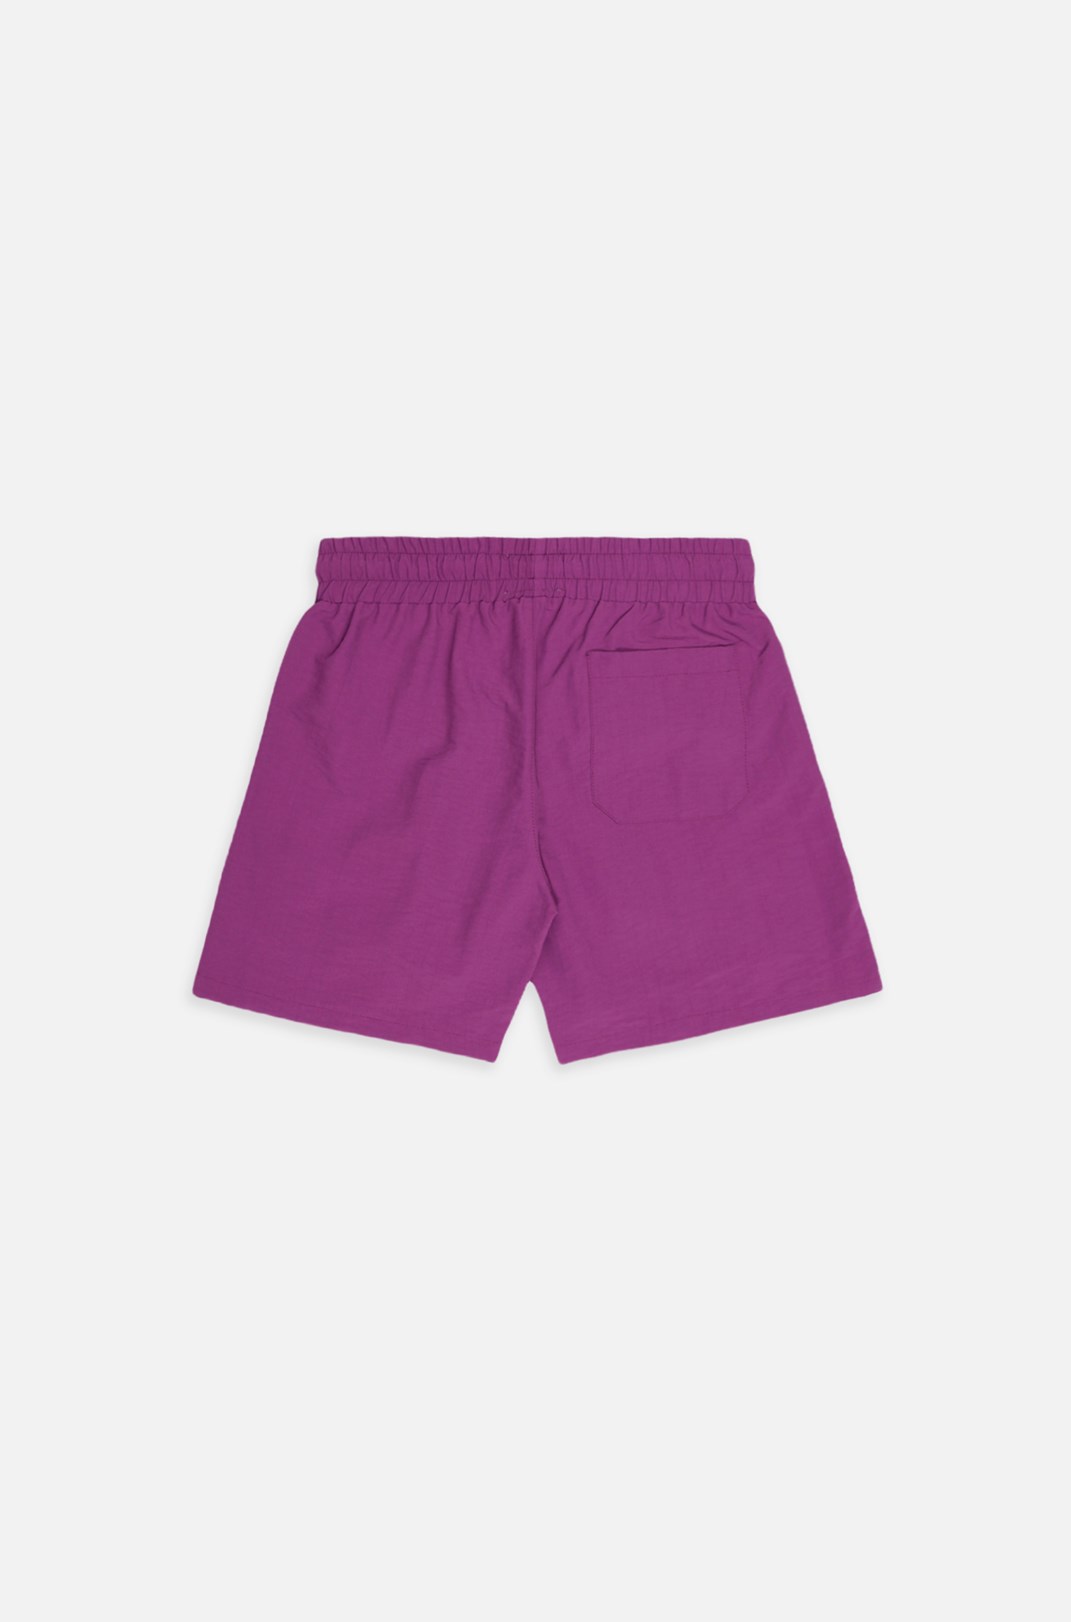 Shorts Approve Roxo